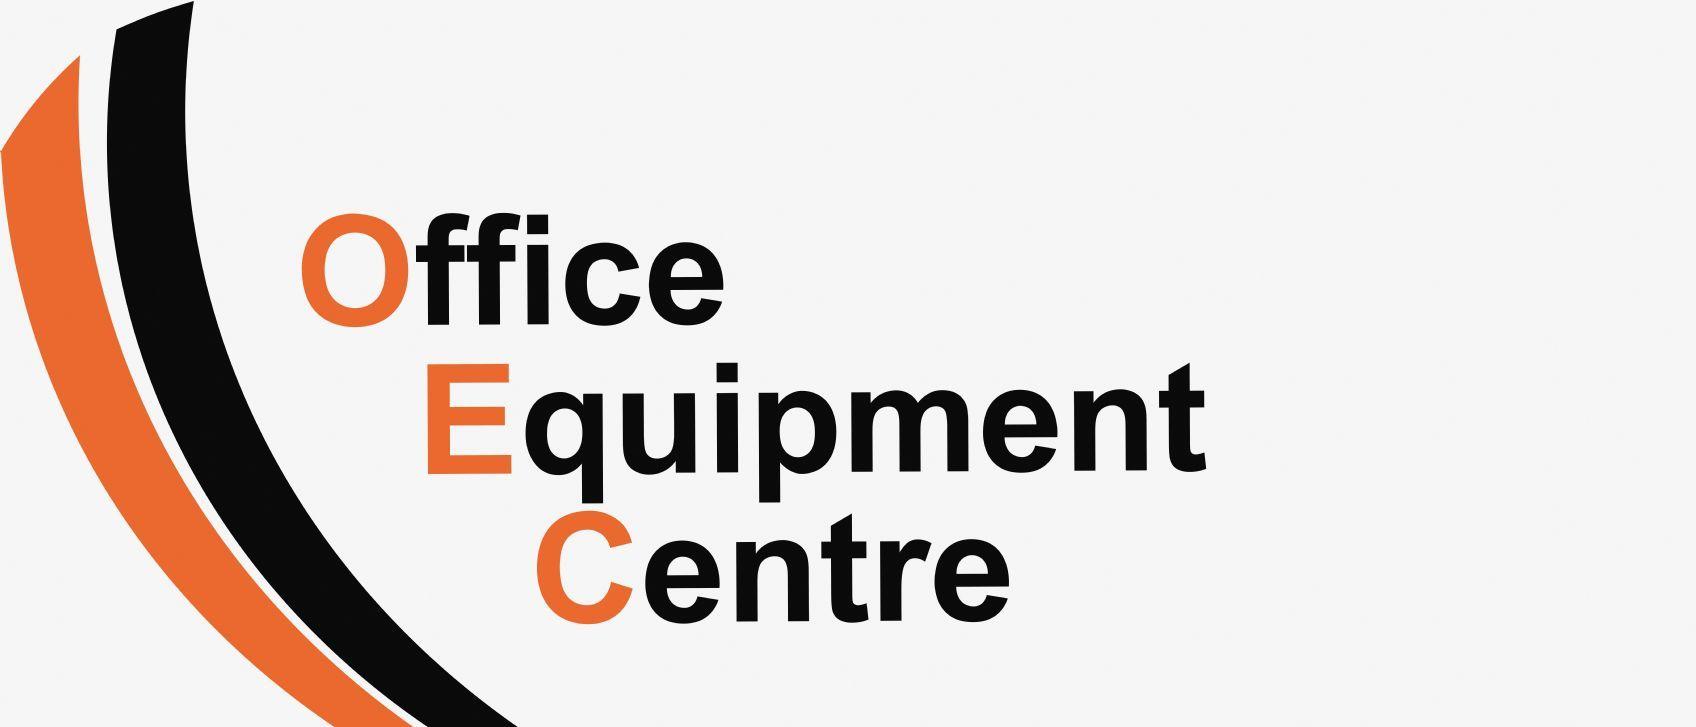 Office-Supplies Logo - Office Supplies, Stationery & Printing Equipment Centre